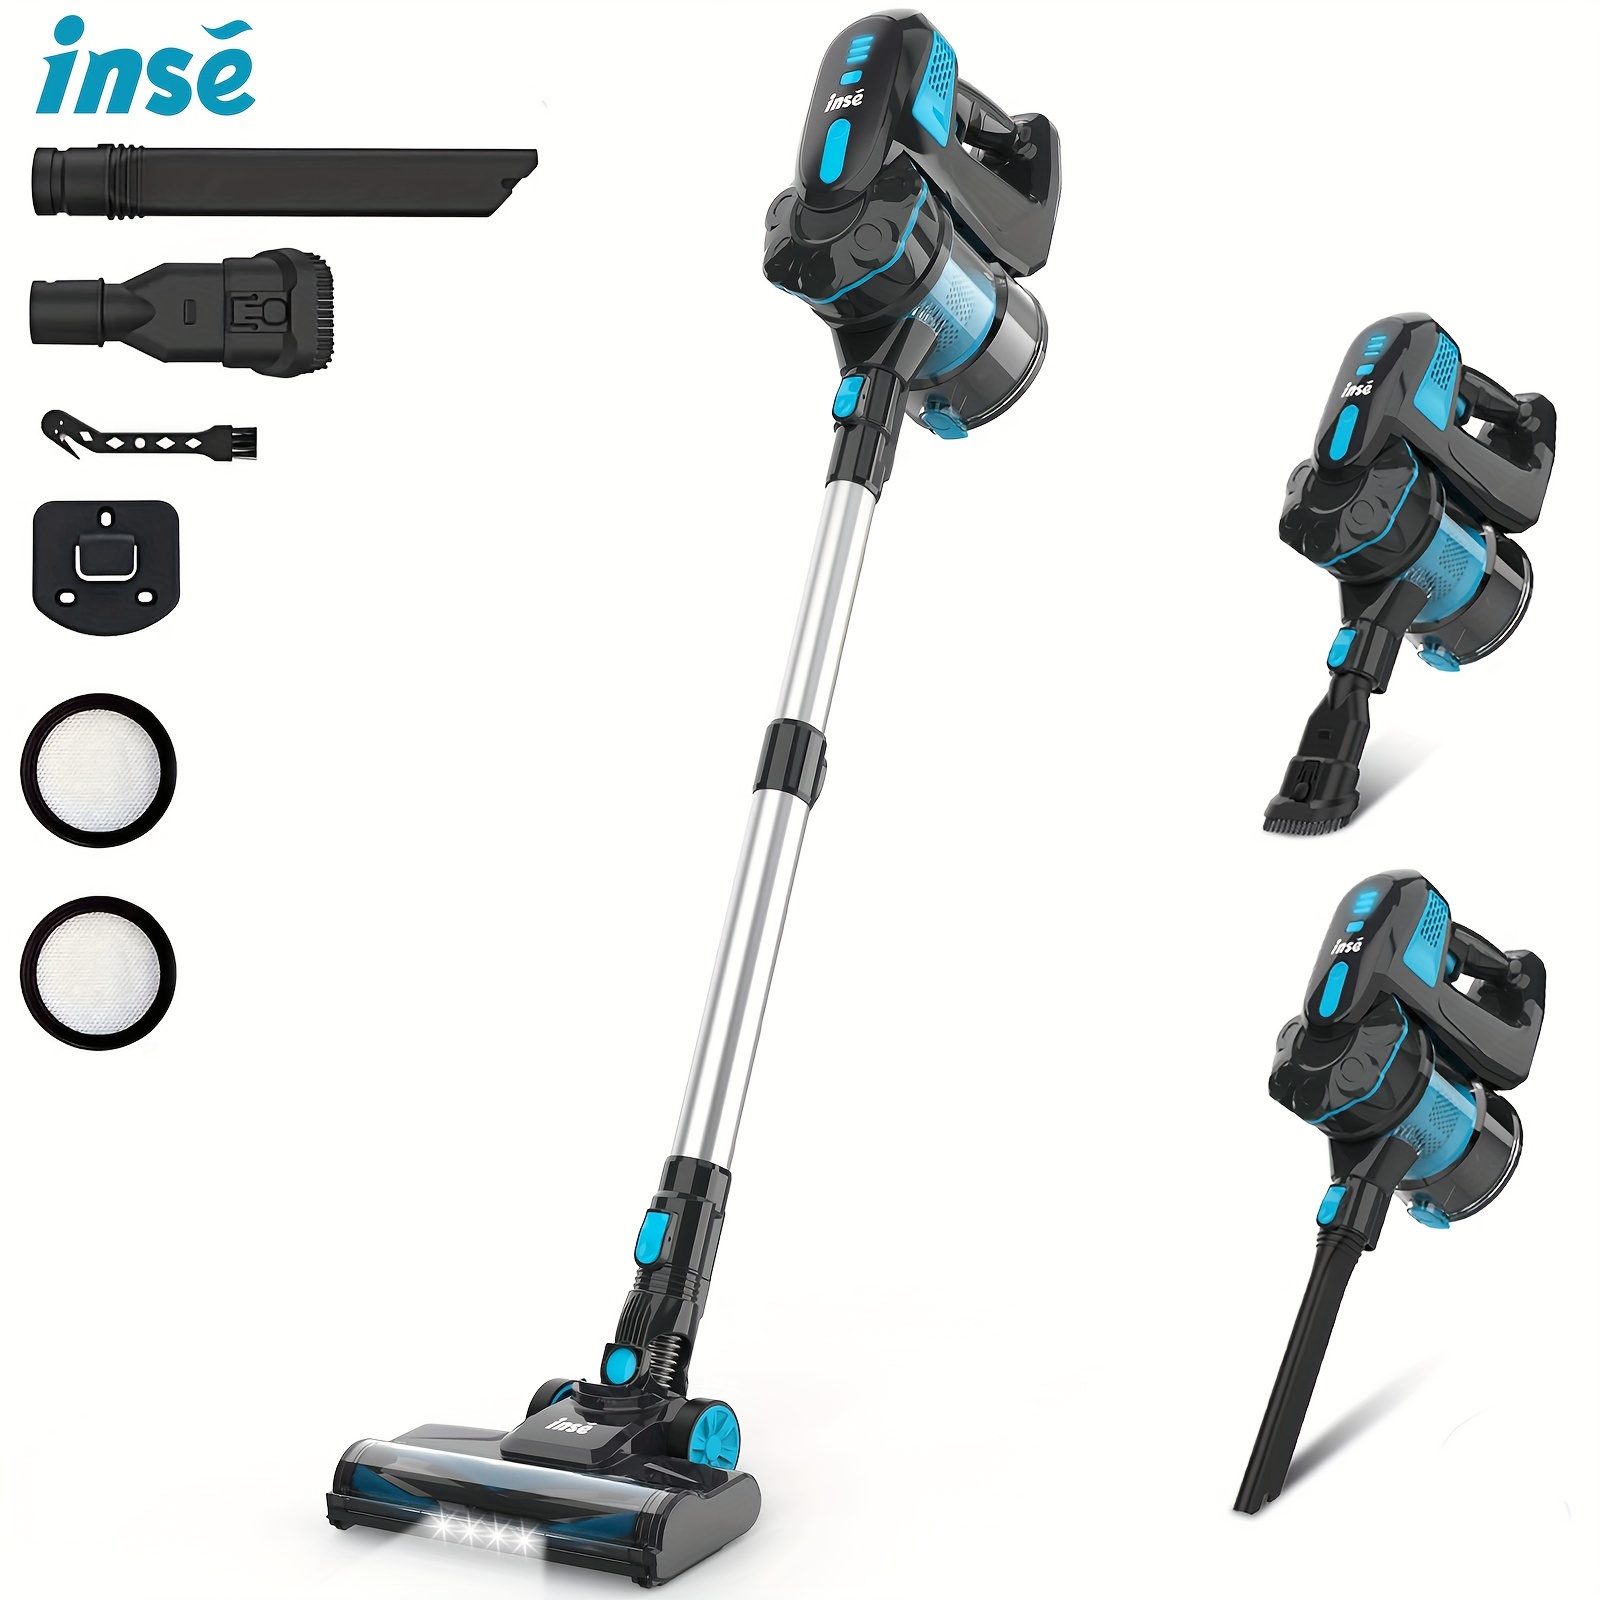 INSE Cordless Vacuum Cleaner, 6-in-1 Rechargeable Stick Vacuum, 45mins Runtime, Lightweight 2200mAh Battery Vacuum, Ultra-Quiet, Multifunctional Vacuum Cleaner for Home Pet Hair Hard Floor Car-V770